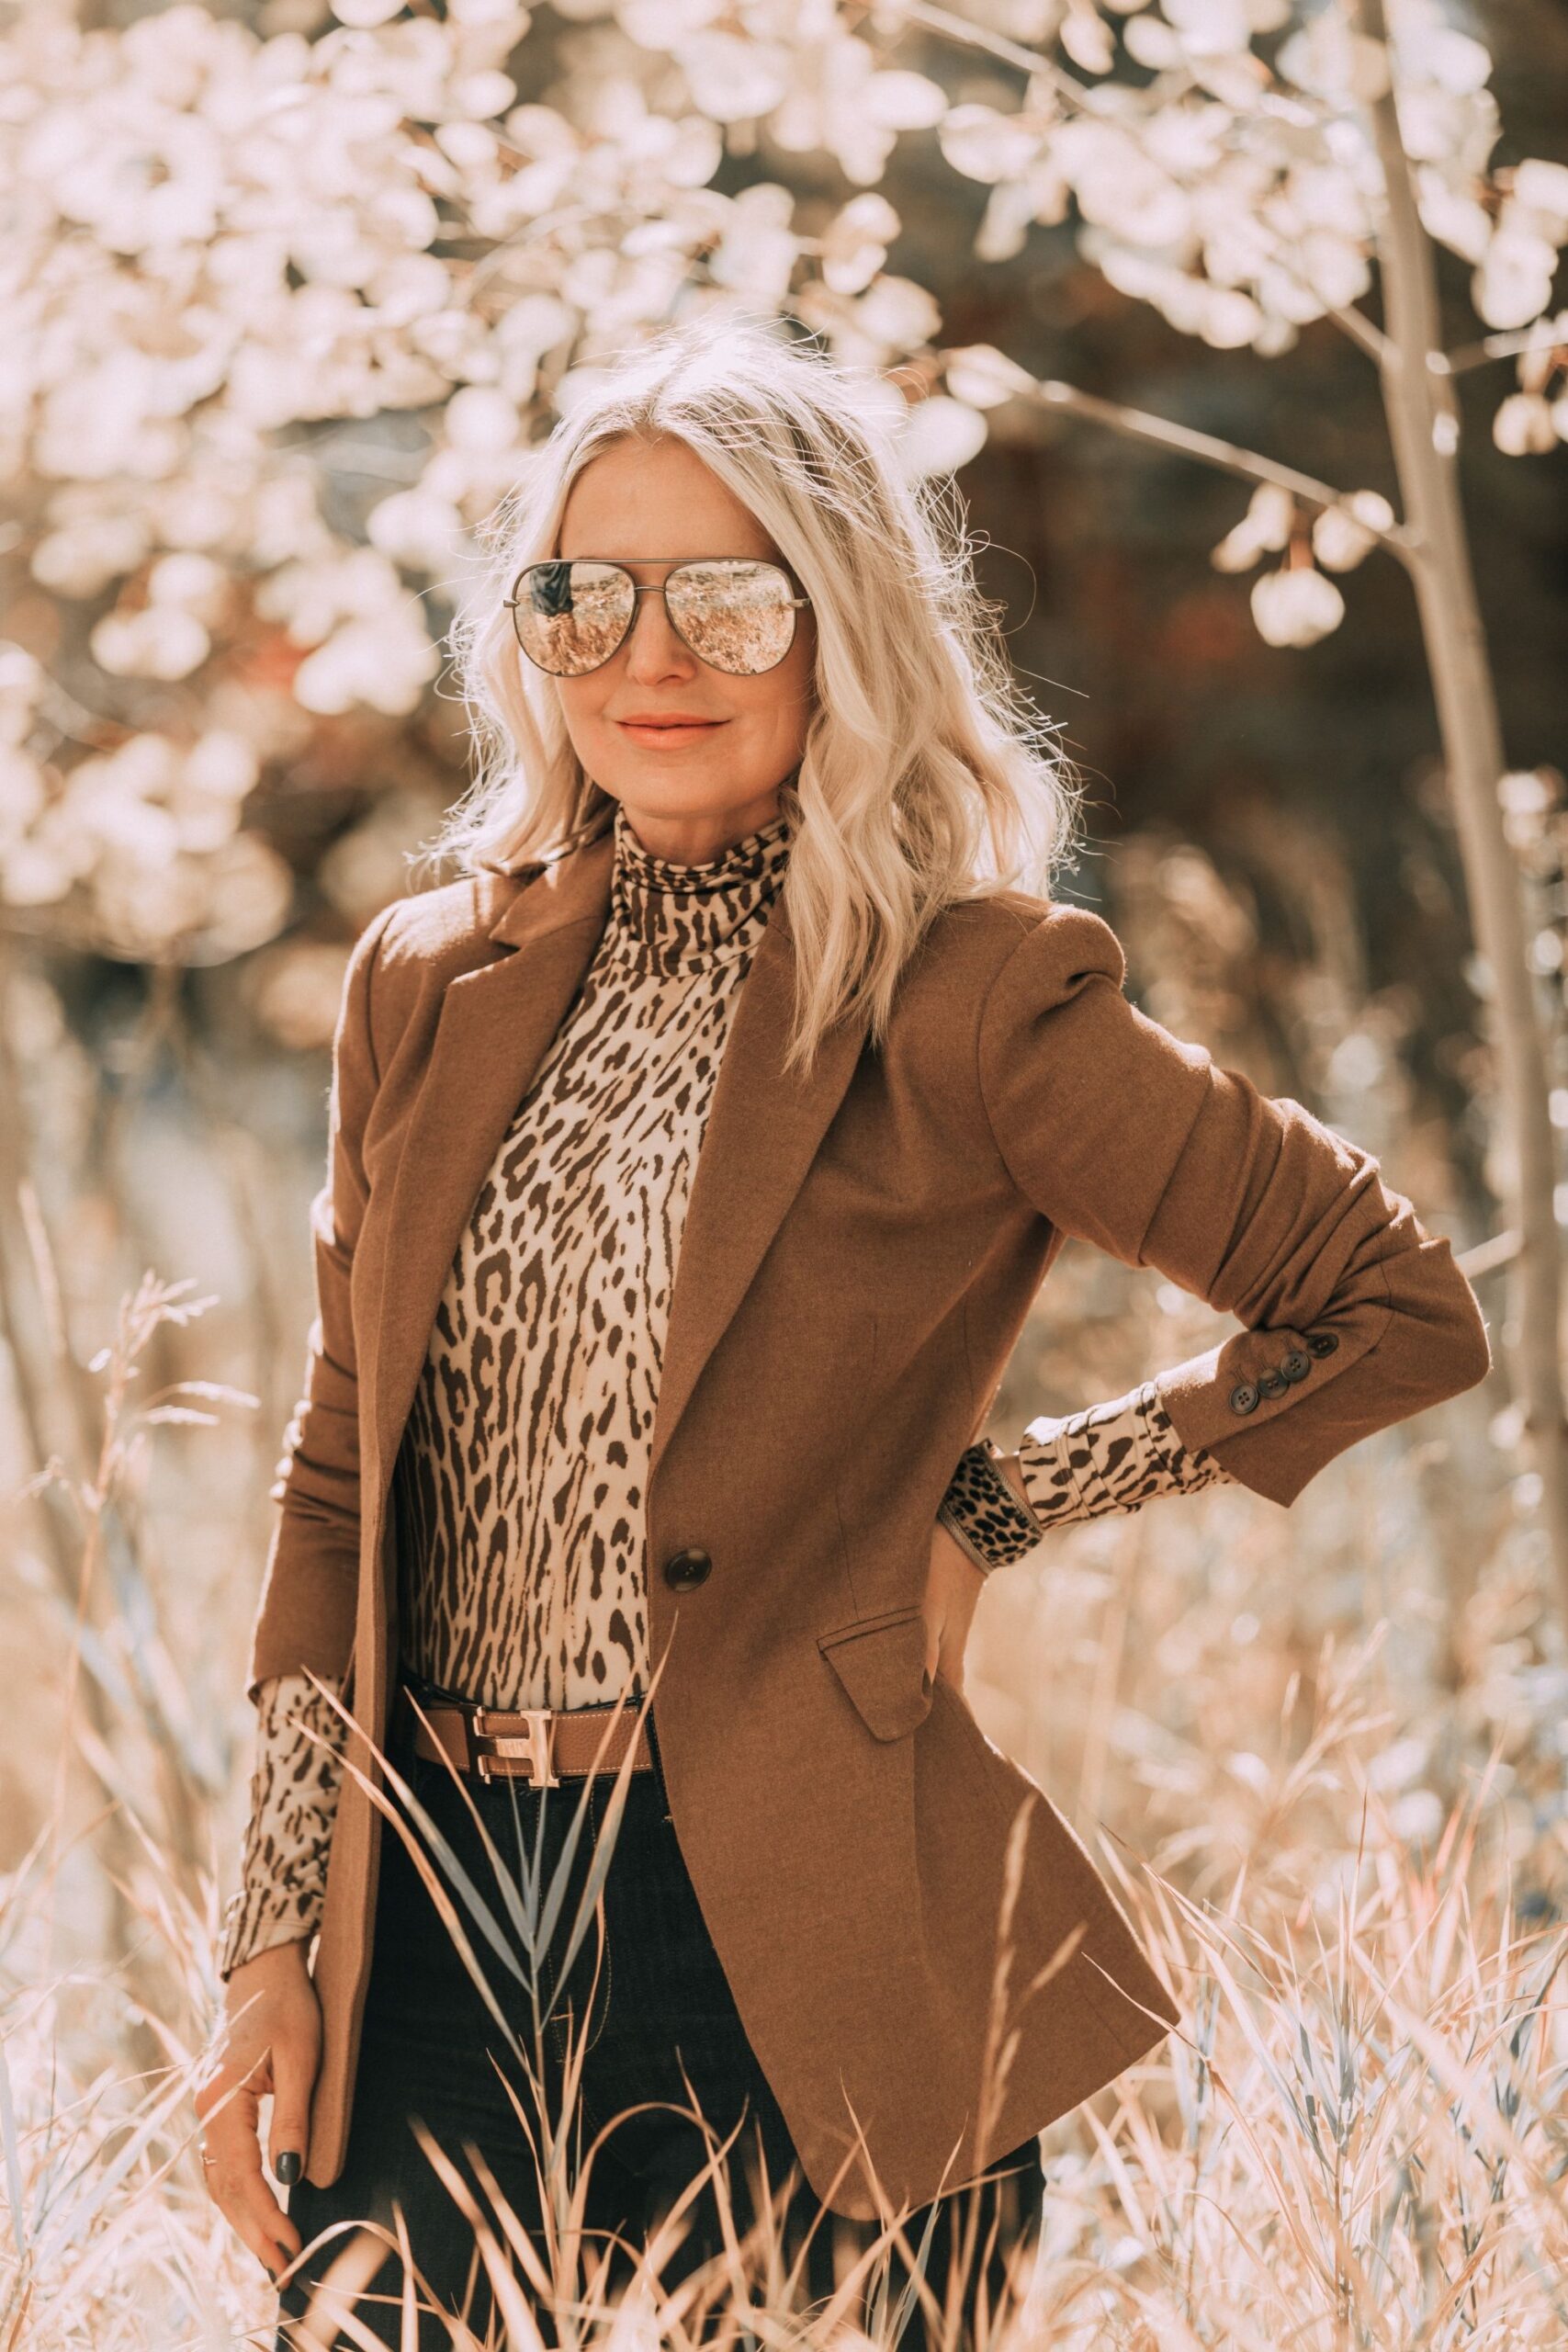 Brown Blazer Outfit Ideas for
  Ladies